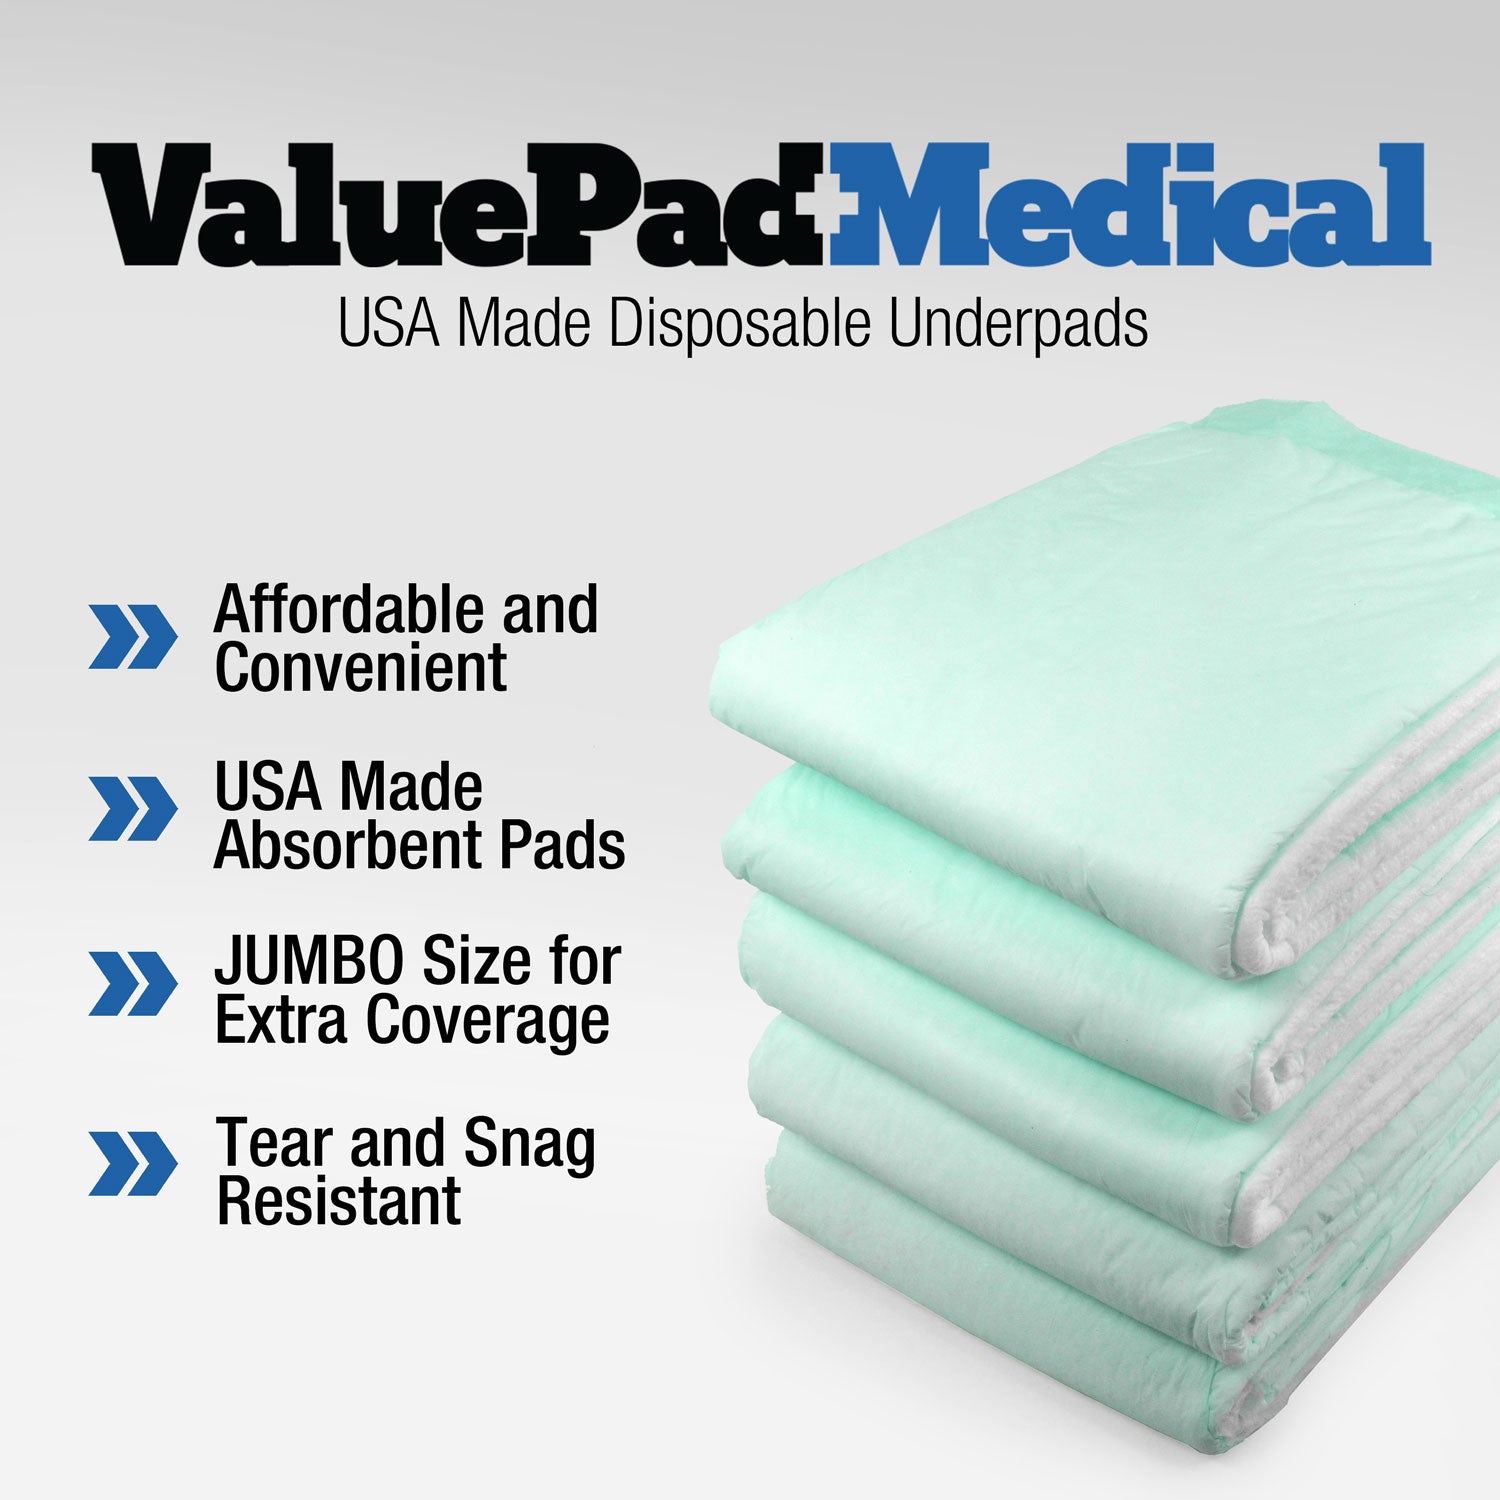 ValuePad USA Disposable Underpads for Incontinence, Bedwetting and Pets, Large 30"x30", 1200 ct BULK PACK